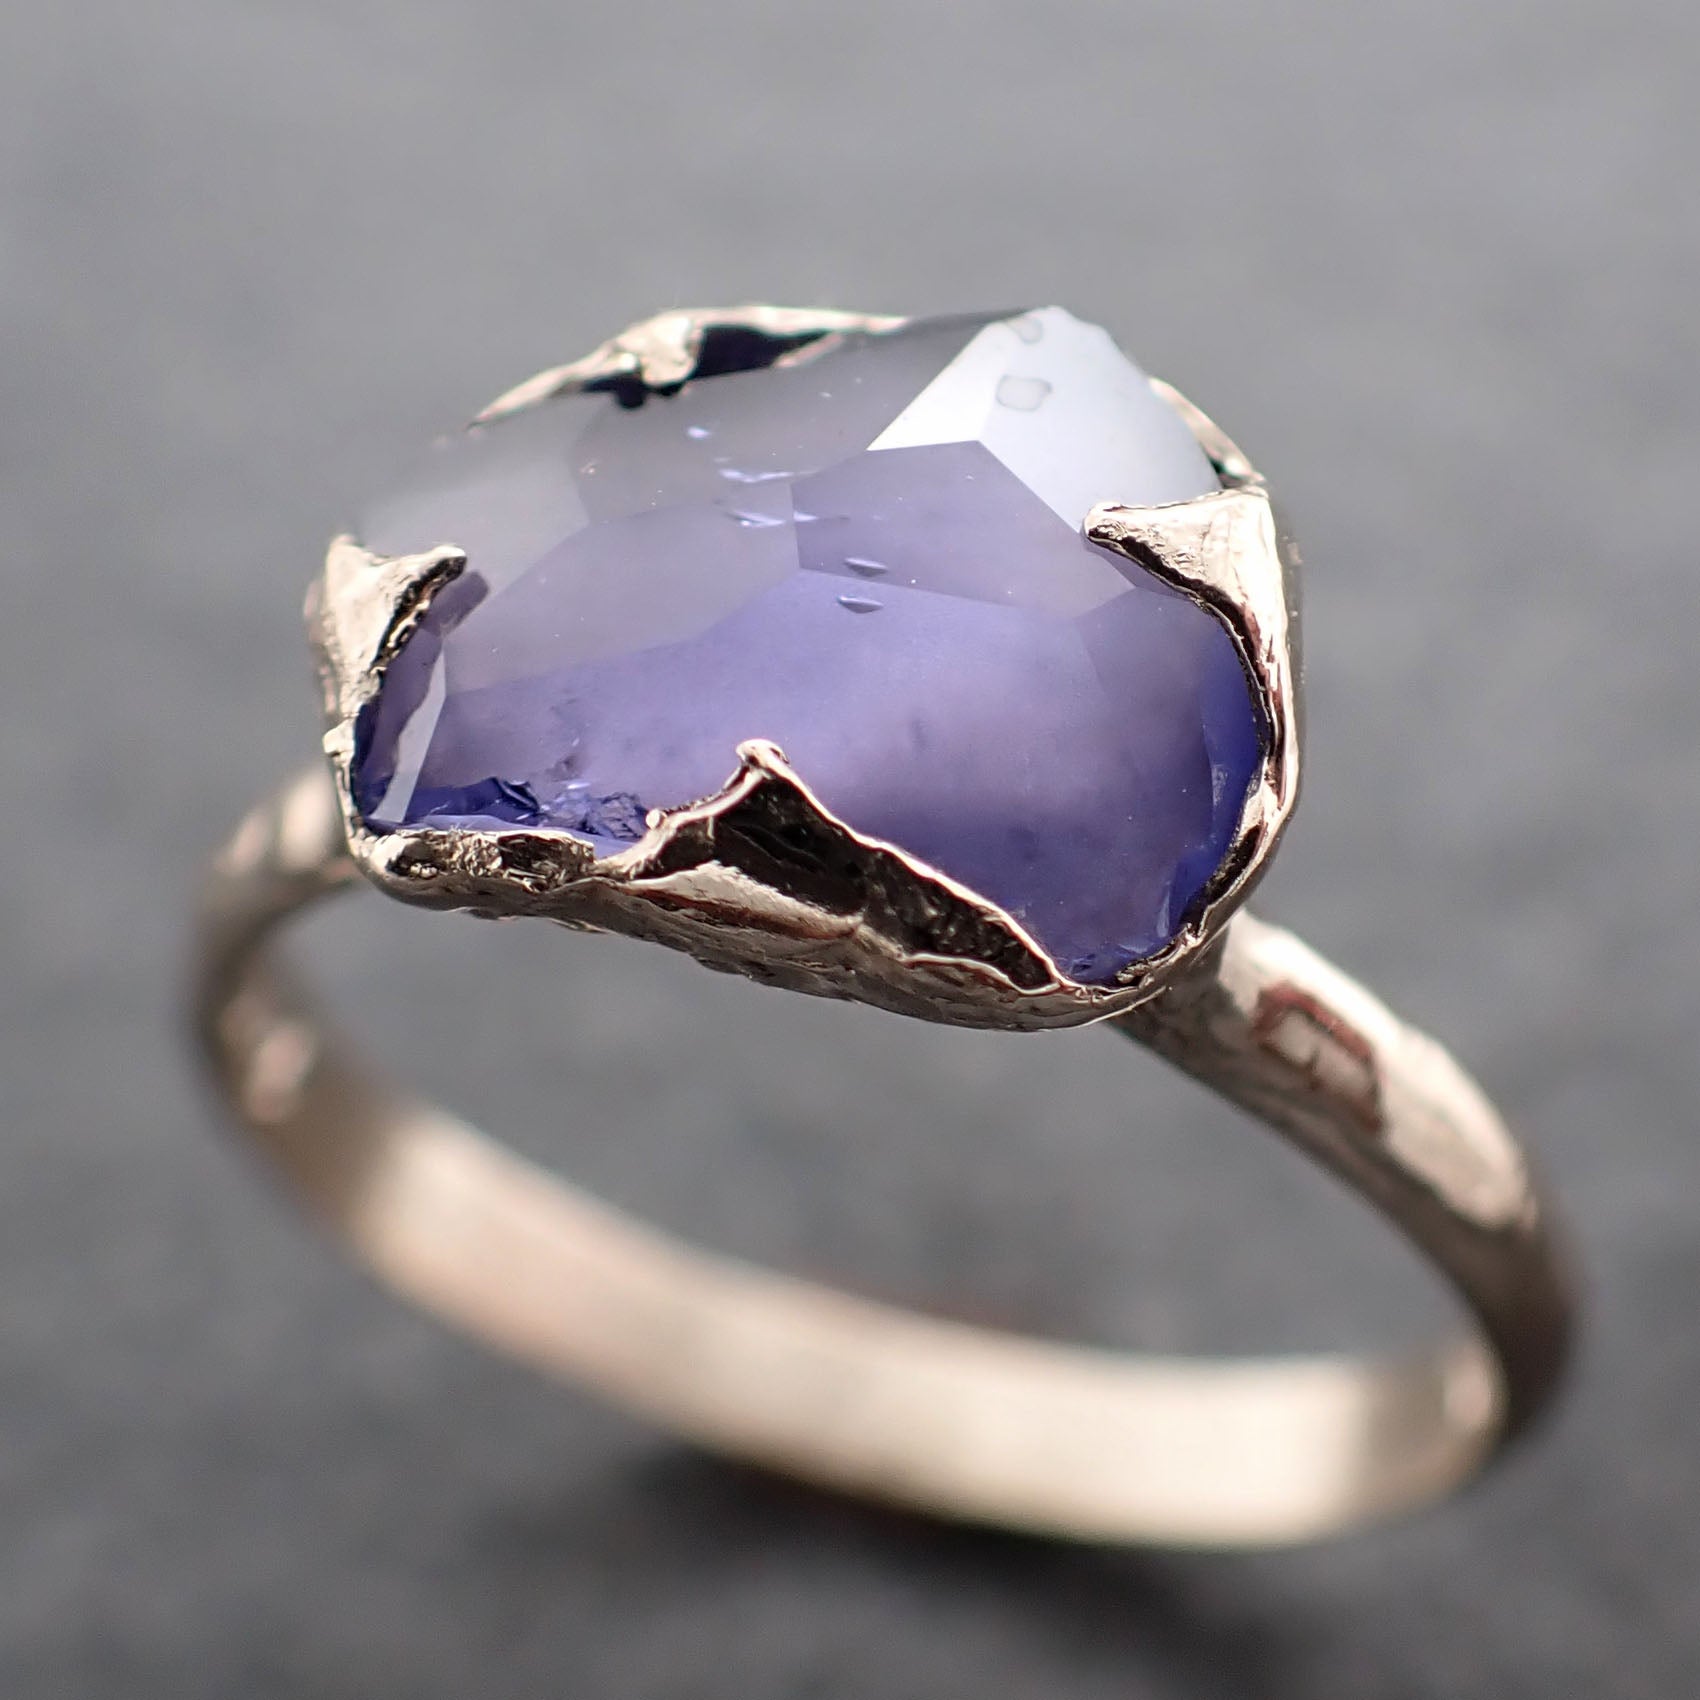 Partially Faceted lavender Sapphire Solitaire 18k white Gold Engagement Ring Wedding Ring Custom One Of a Kind Gemstone Ring 2793